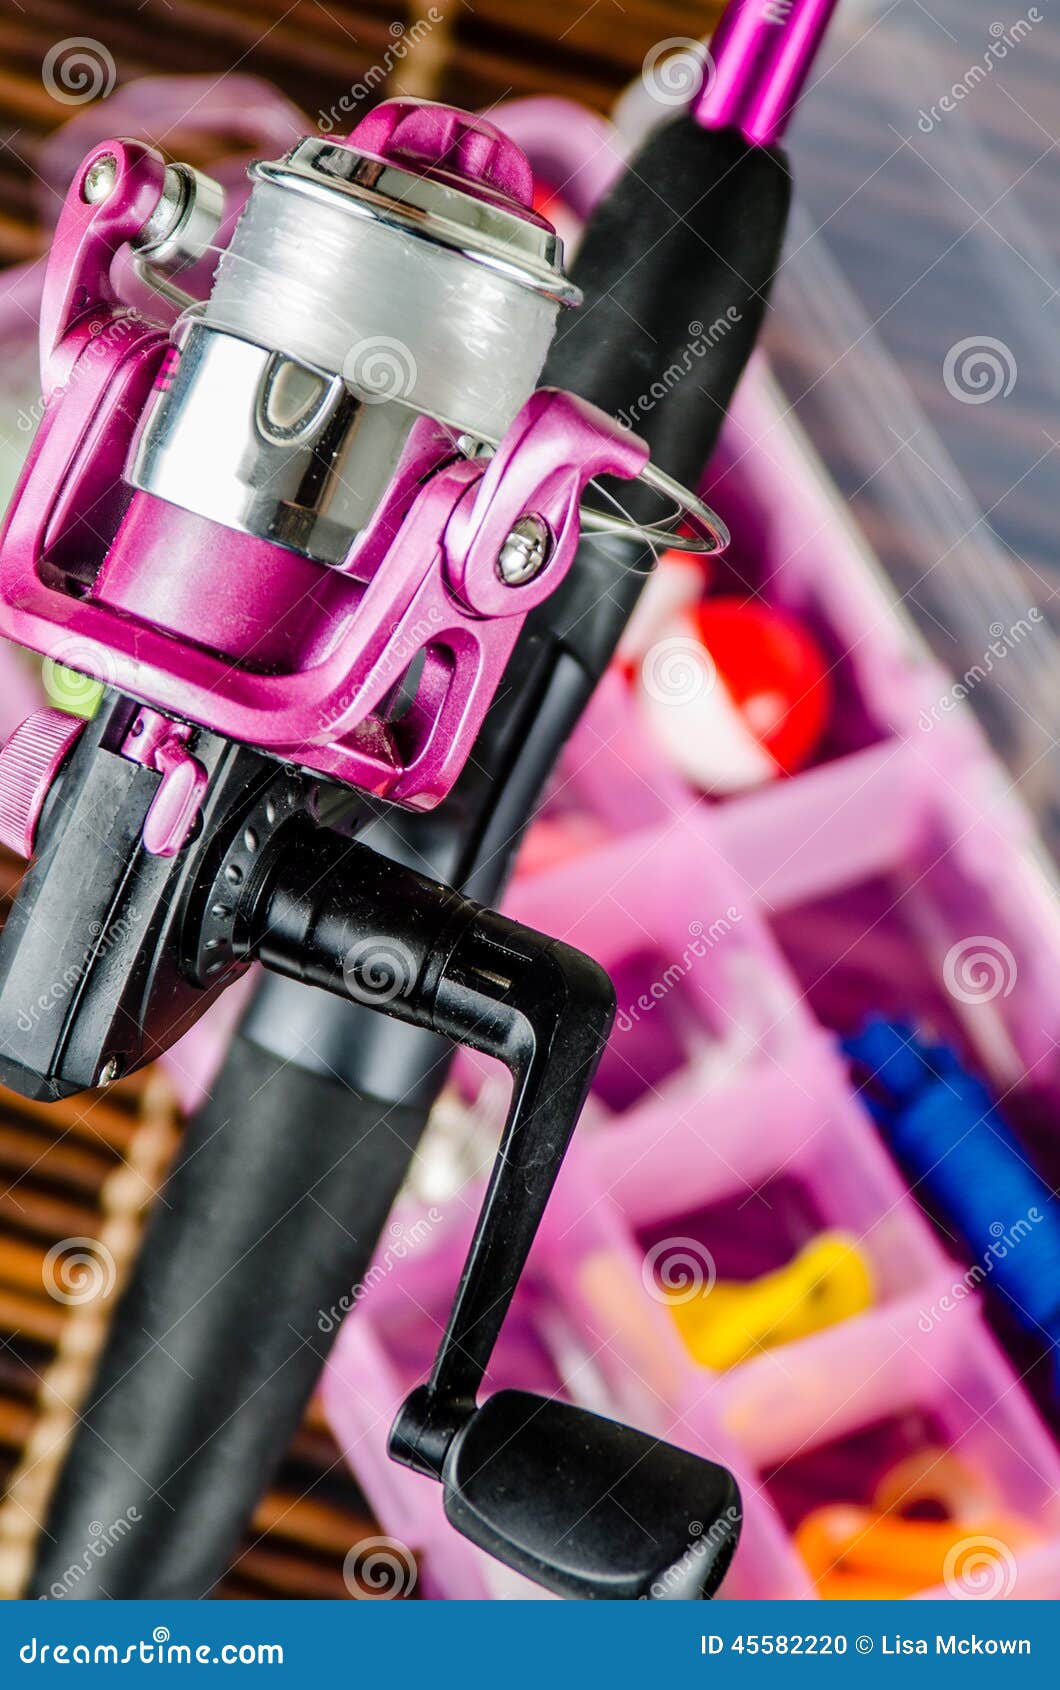 https://thumbs.dreamstime.com/z/fishing-pole-tackle-pink-gear-box-awareness-breast-cancer-45582220.jpg